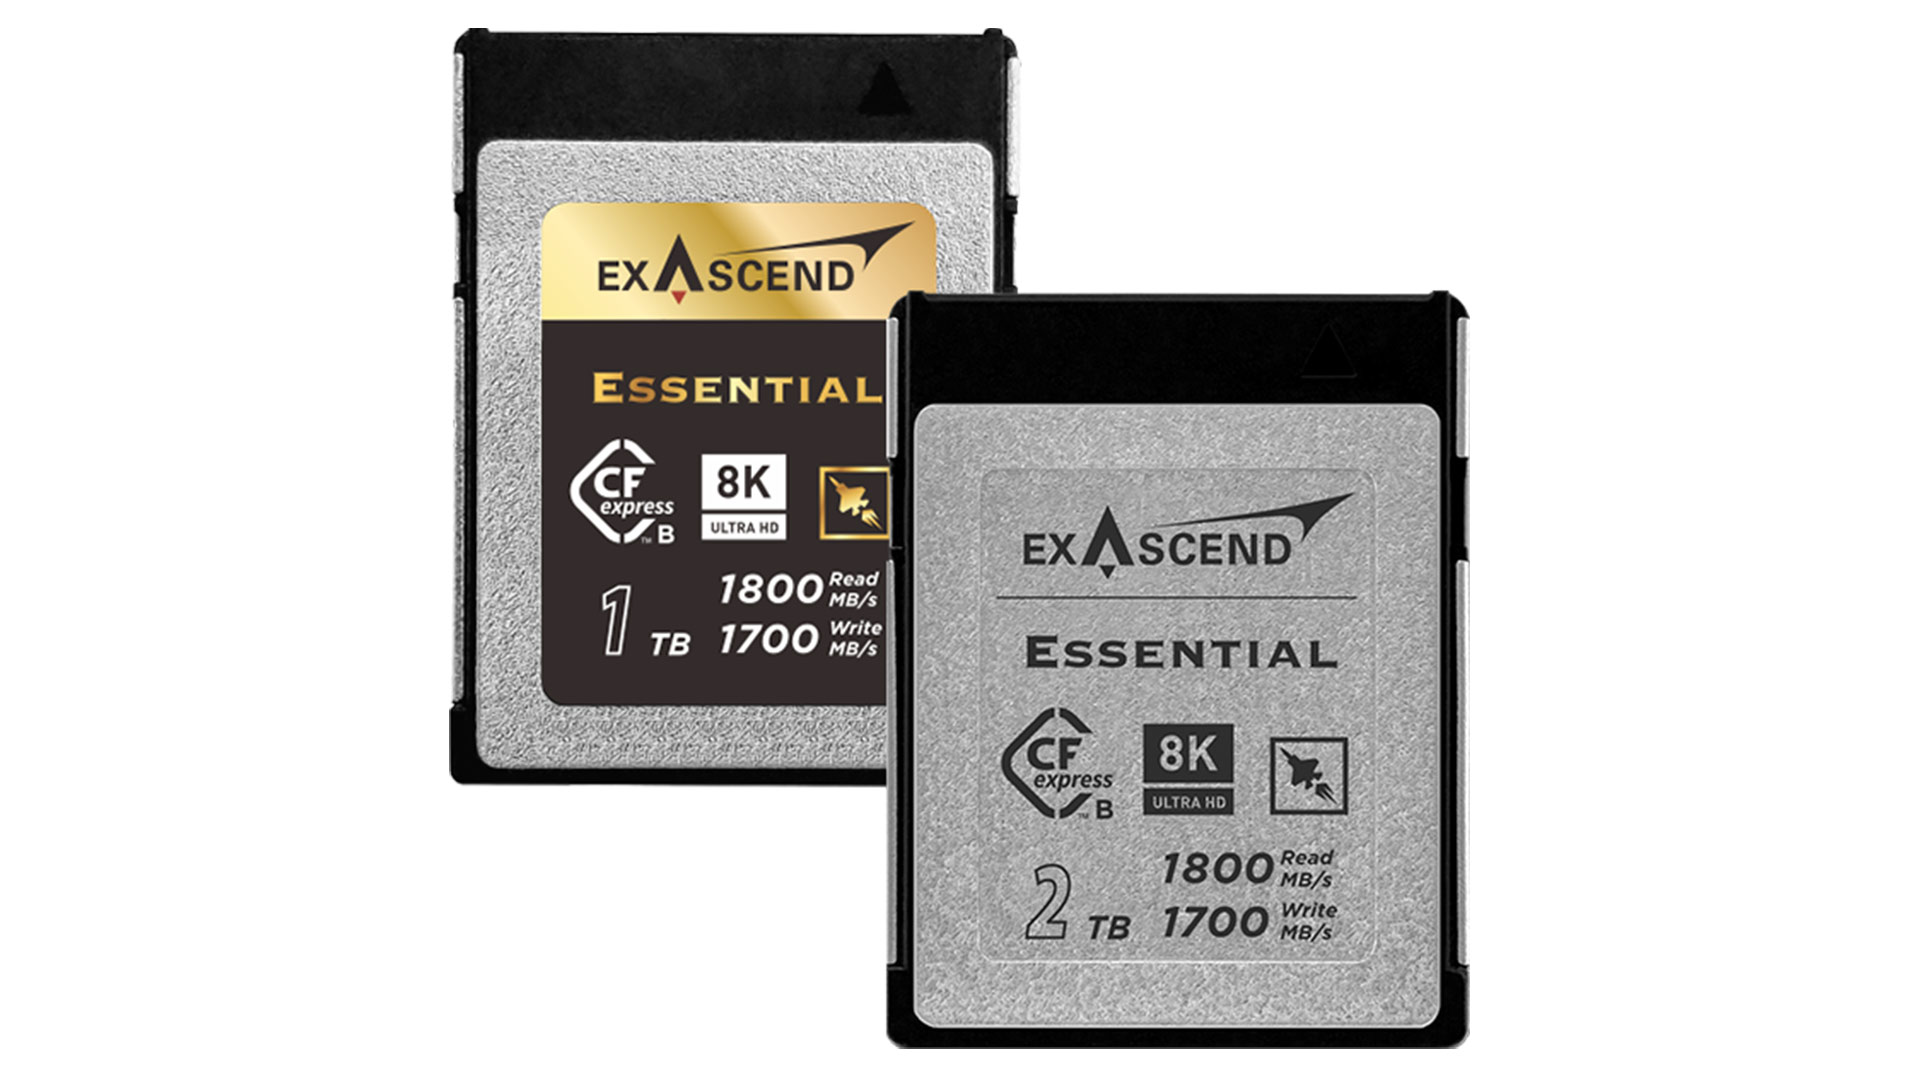 Exascend Essential 2TB CFexpress Type B Memory Card Announced With Faster  Write Speed | CineD